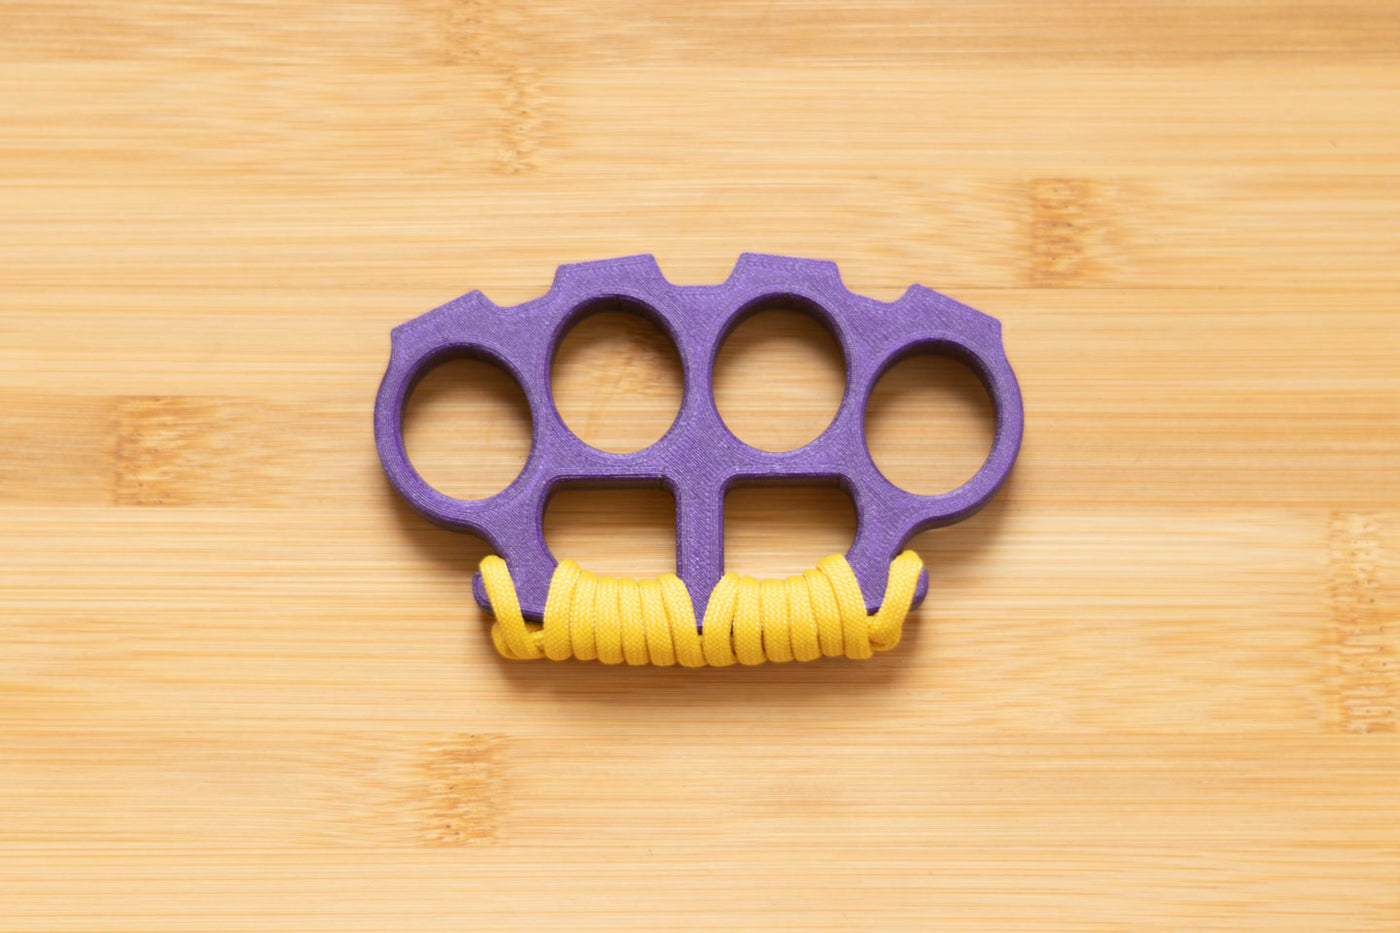 Royal Purple Brass Knuckles wrapped in Yellow Paracord